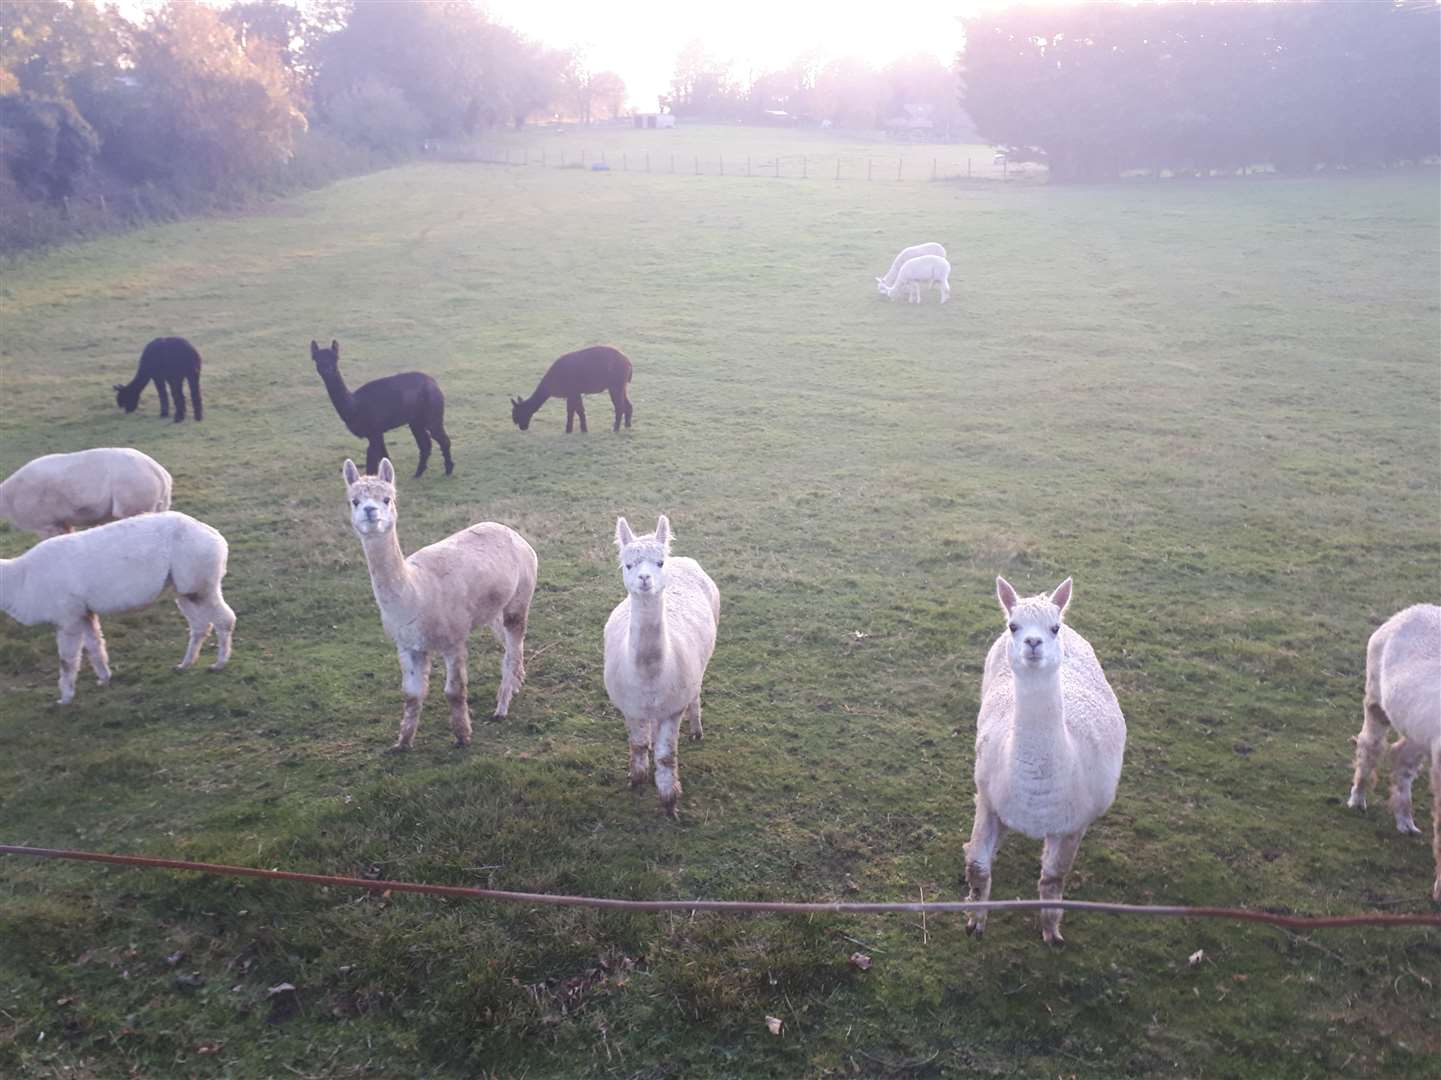 The field currently holds a flock of alpacas